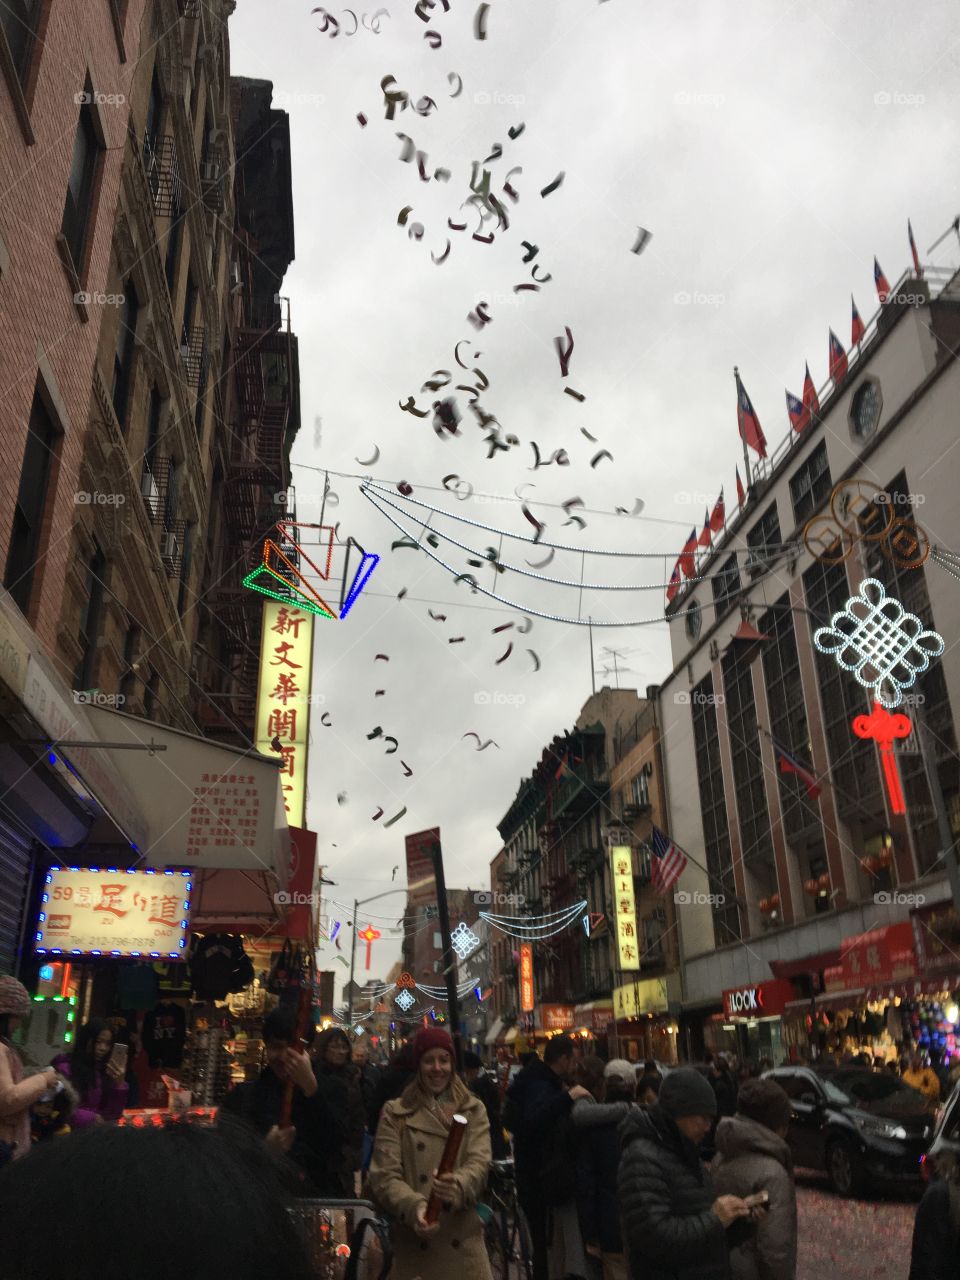 Chinese New Year in Chinatown; warm, colorful, festive